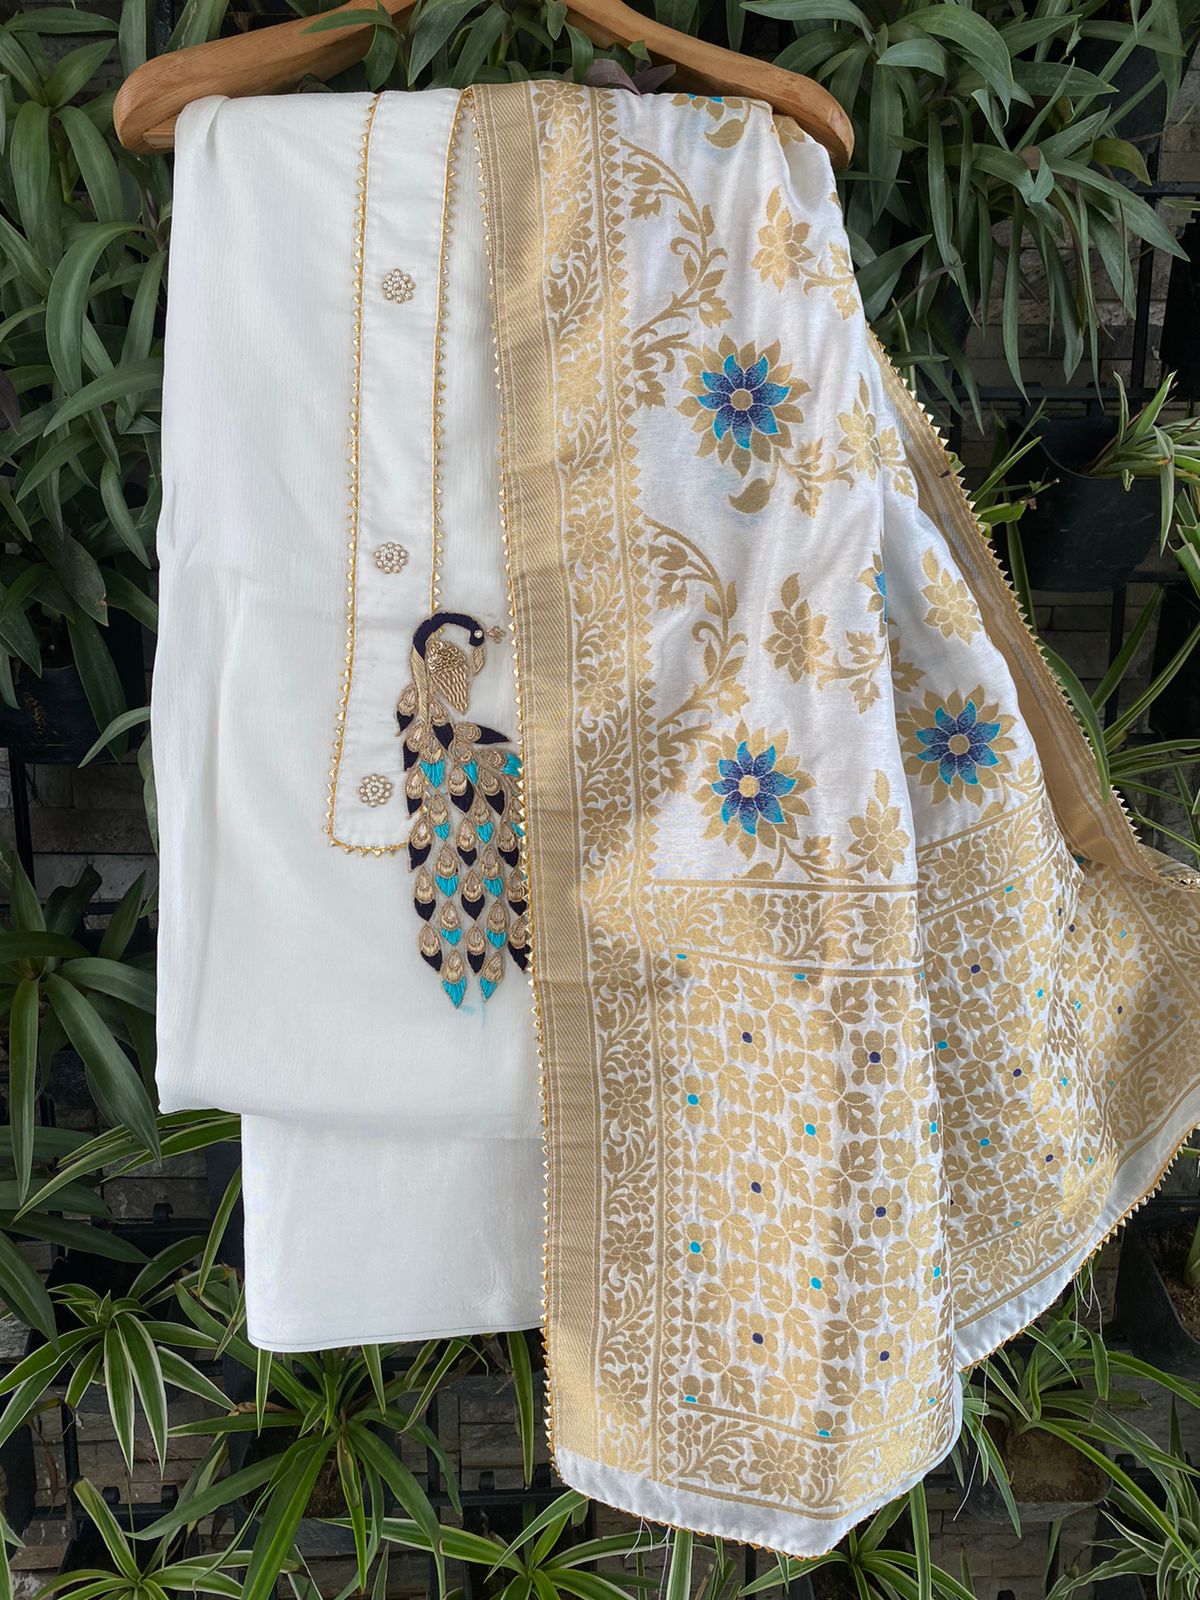 Peacock shines Upada silk suit set with woven chanderi dupatta - White, gold & blue